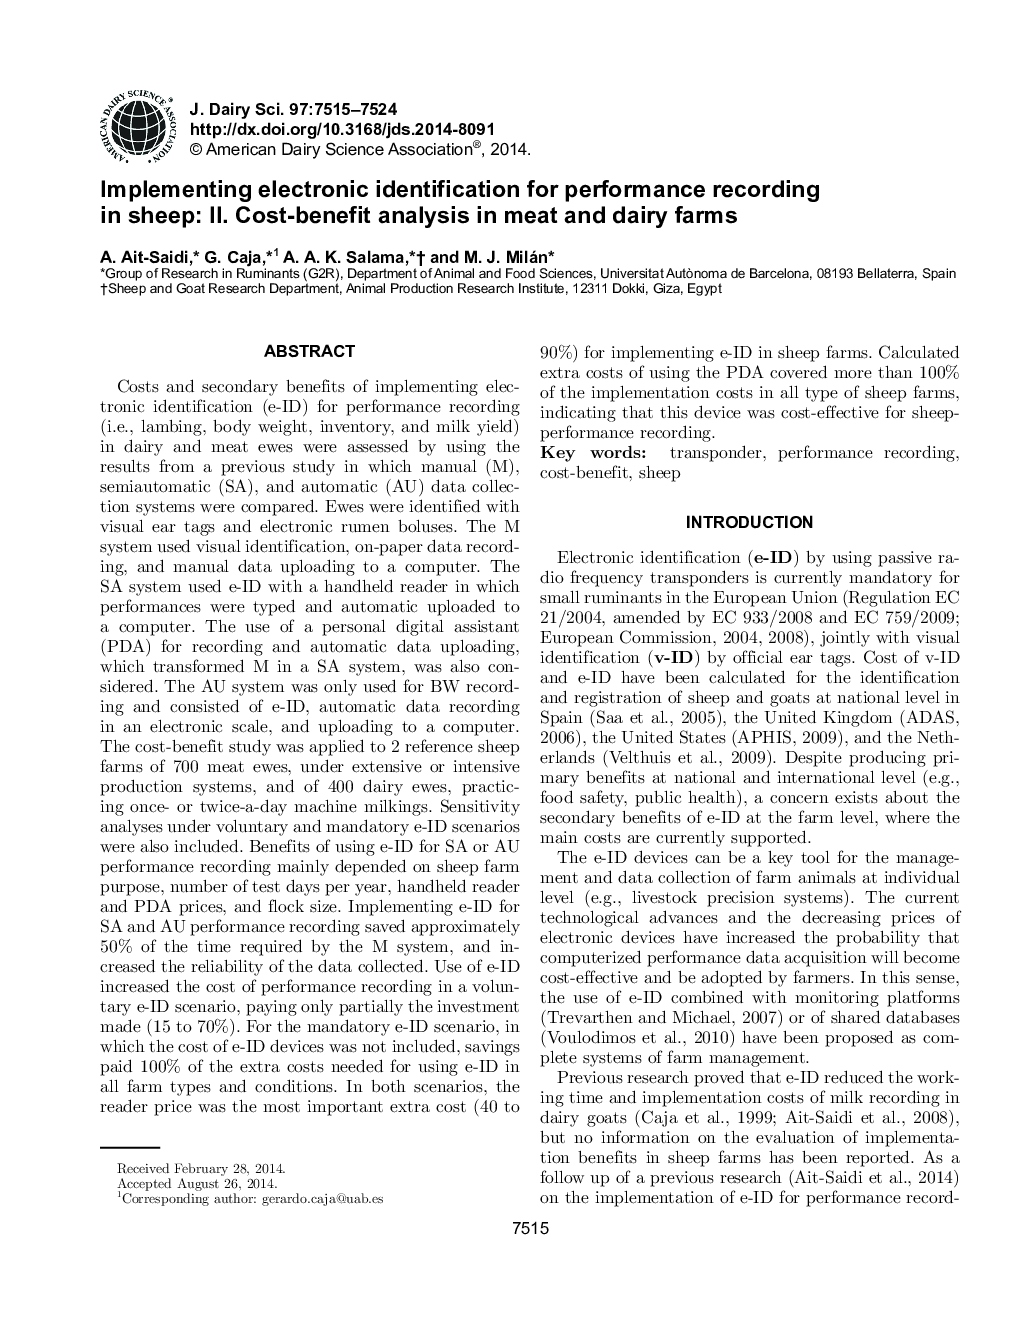 Implementing electronic identification for performance recording in sheep: II. Cost-benefit analysis in meat and dairy farms